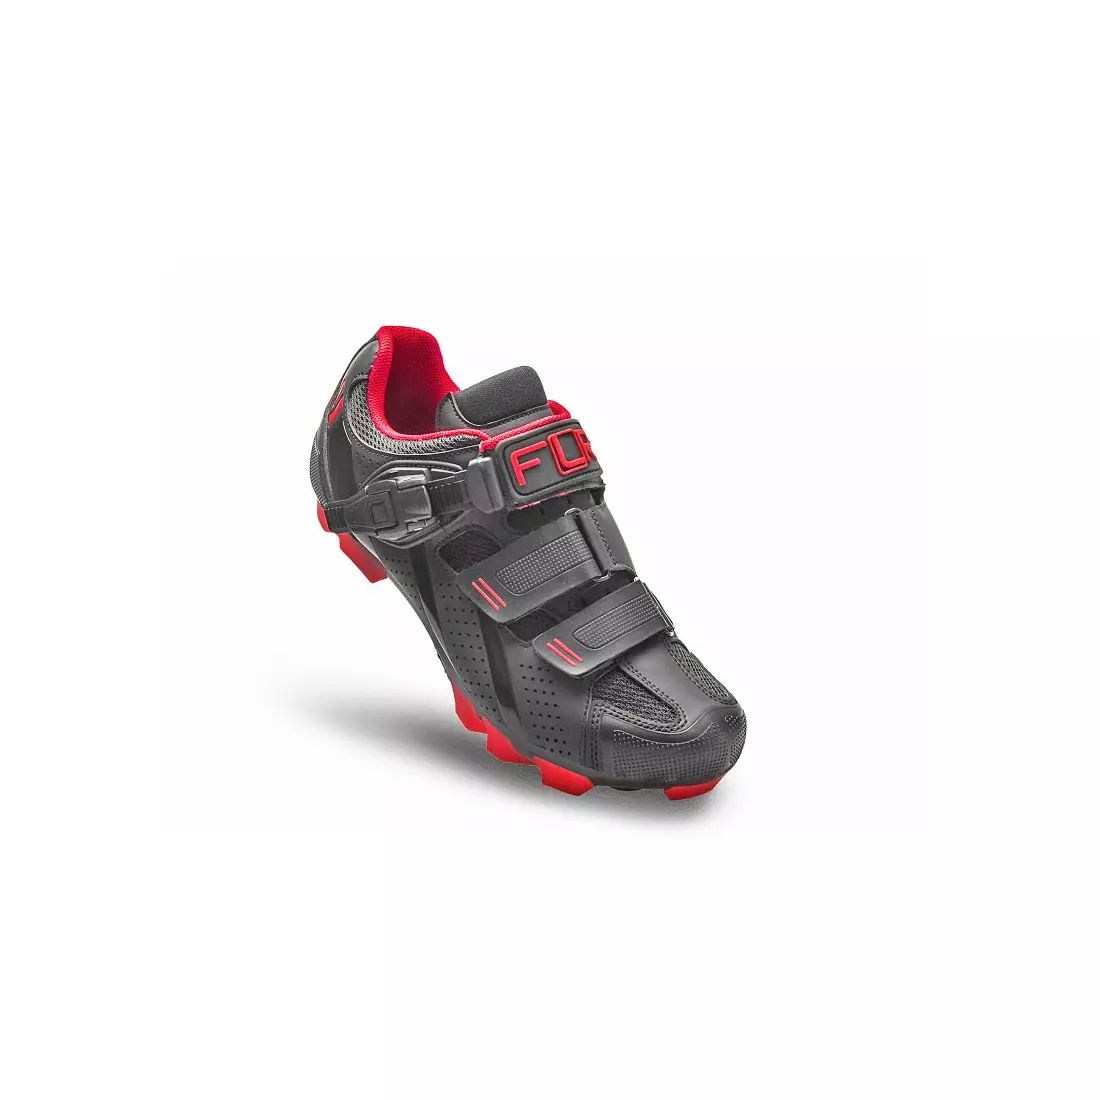 FLR F-65 MTB cycling shoes, black and red